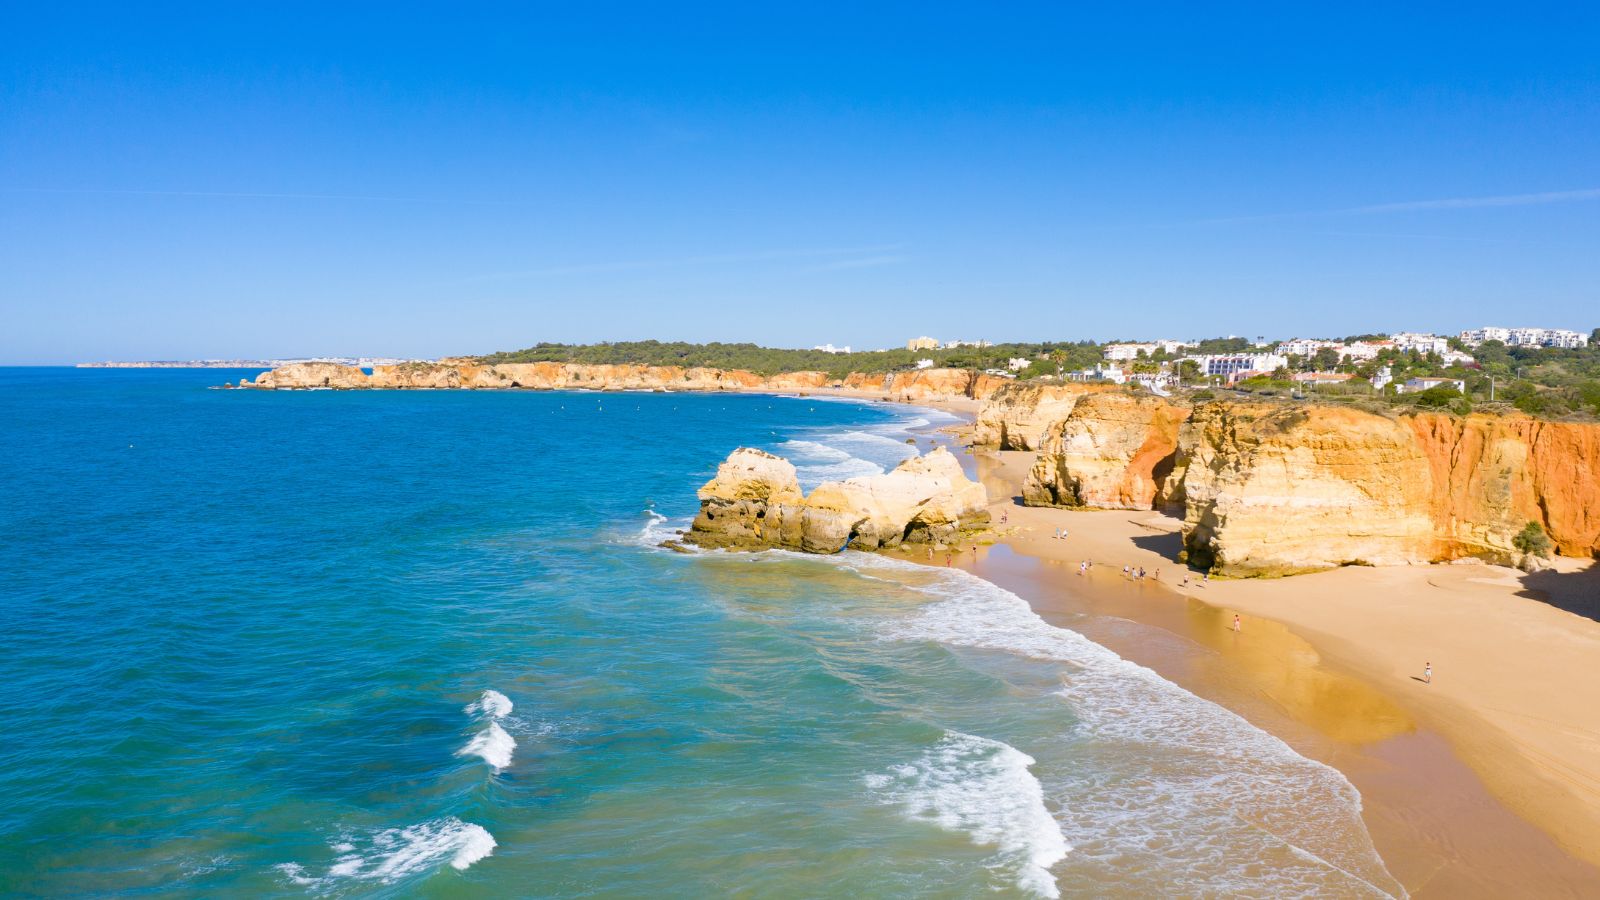 <p>“I've never disliked a place so much before going to Albufeira. What a waste of a beautiful spot with a neat little town. The place was crawling with drunk British people and all of the shops/sidewalks had the same cheap trinkets,” one person complained.</p>